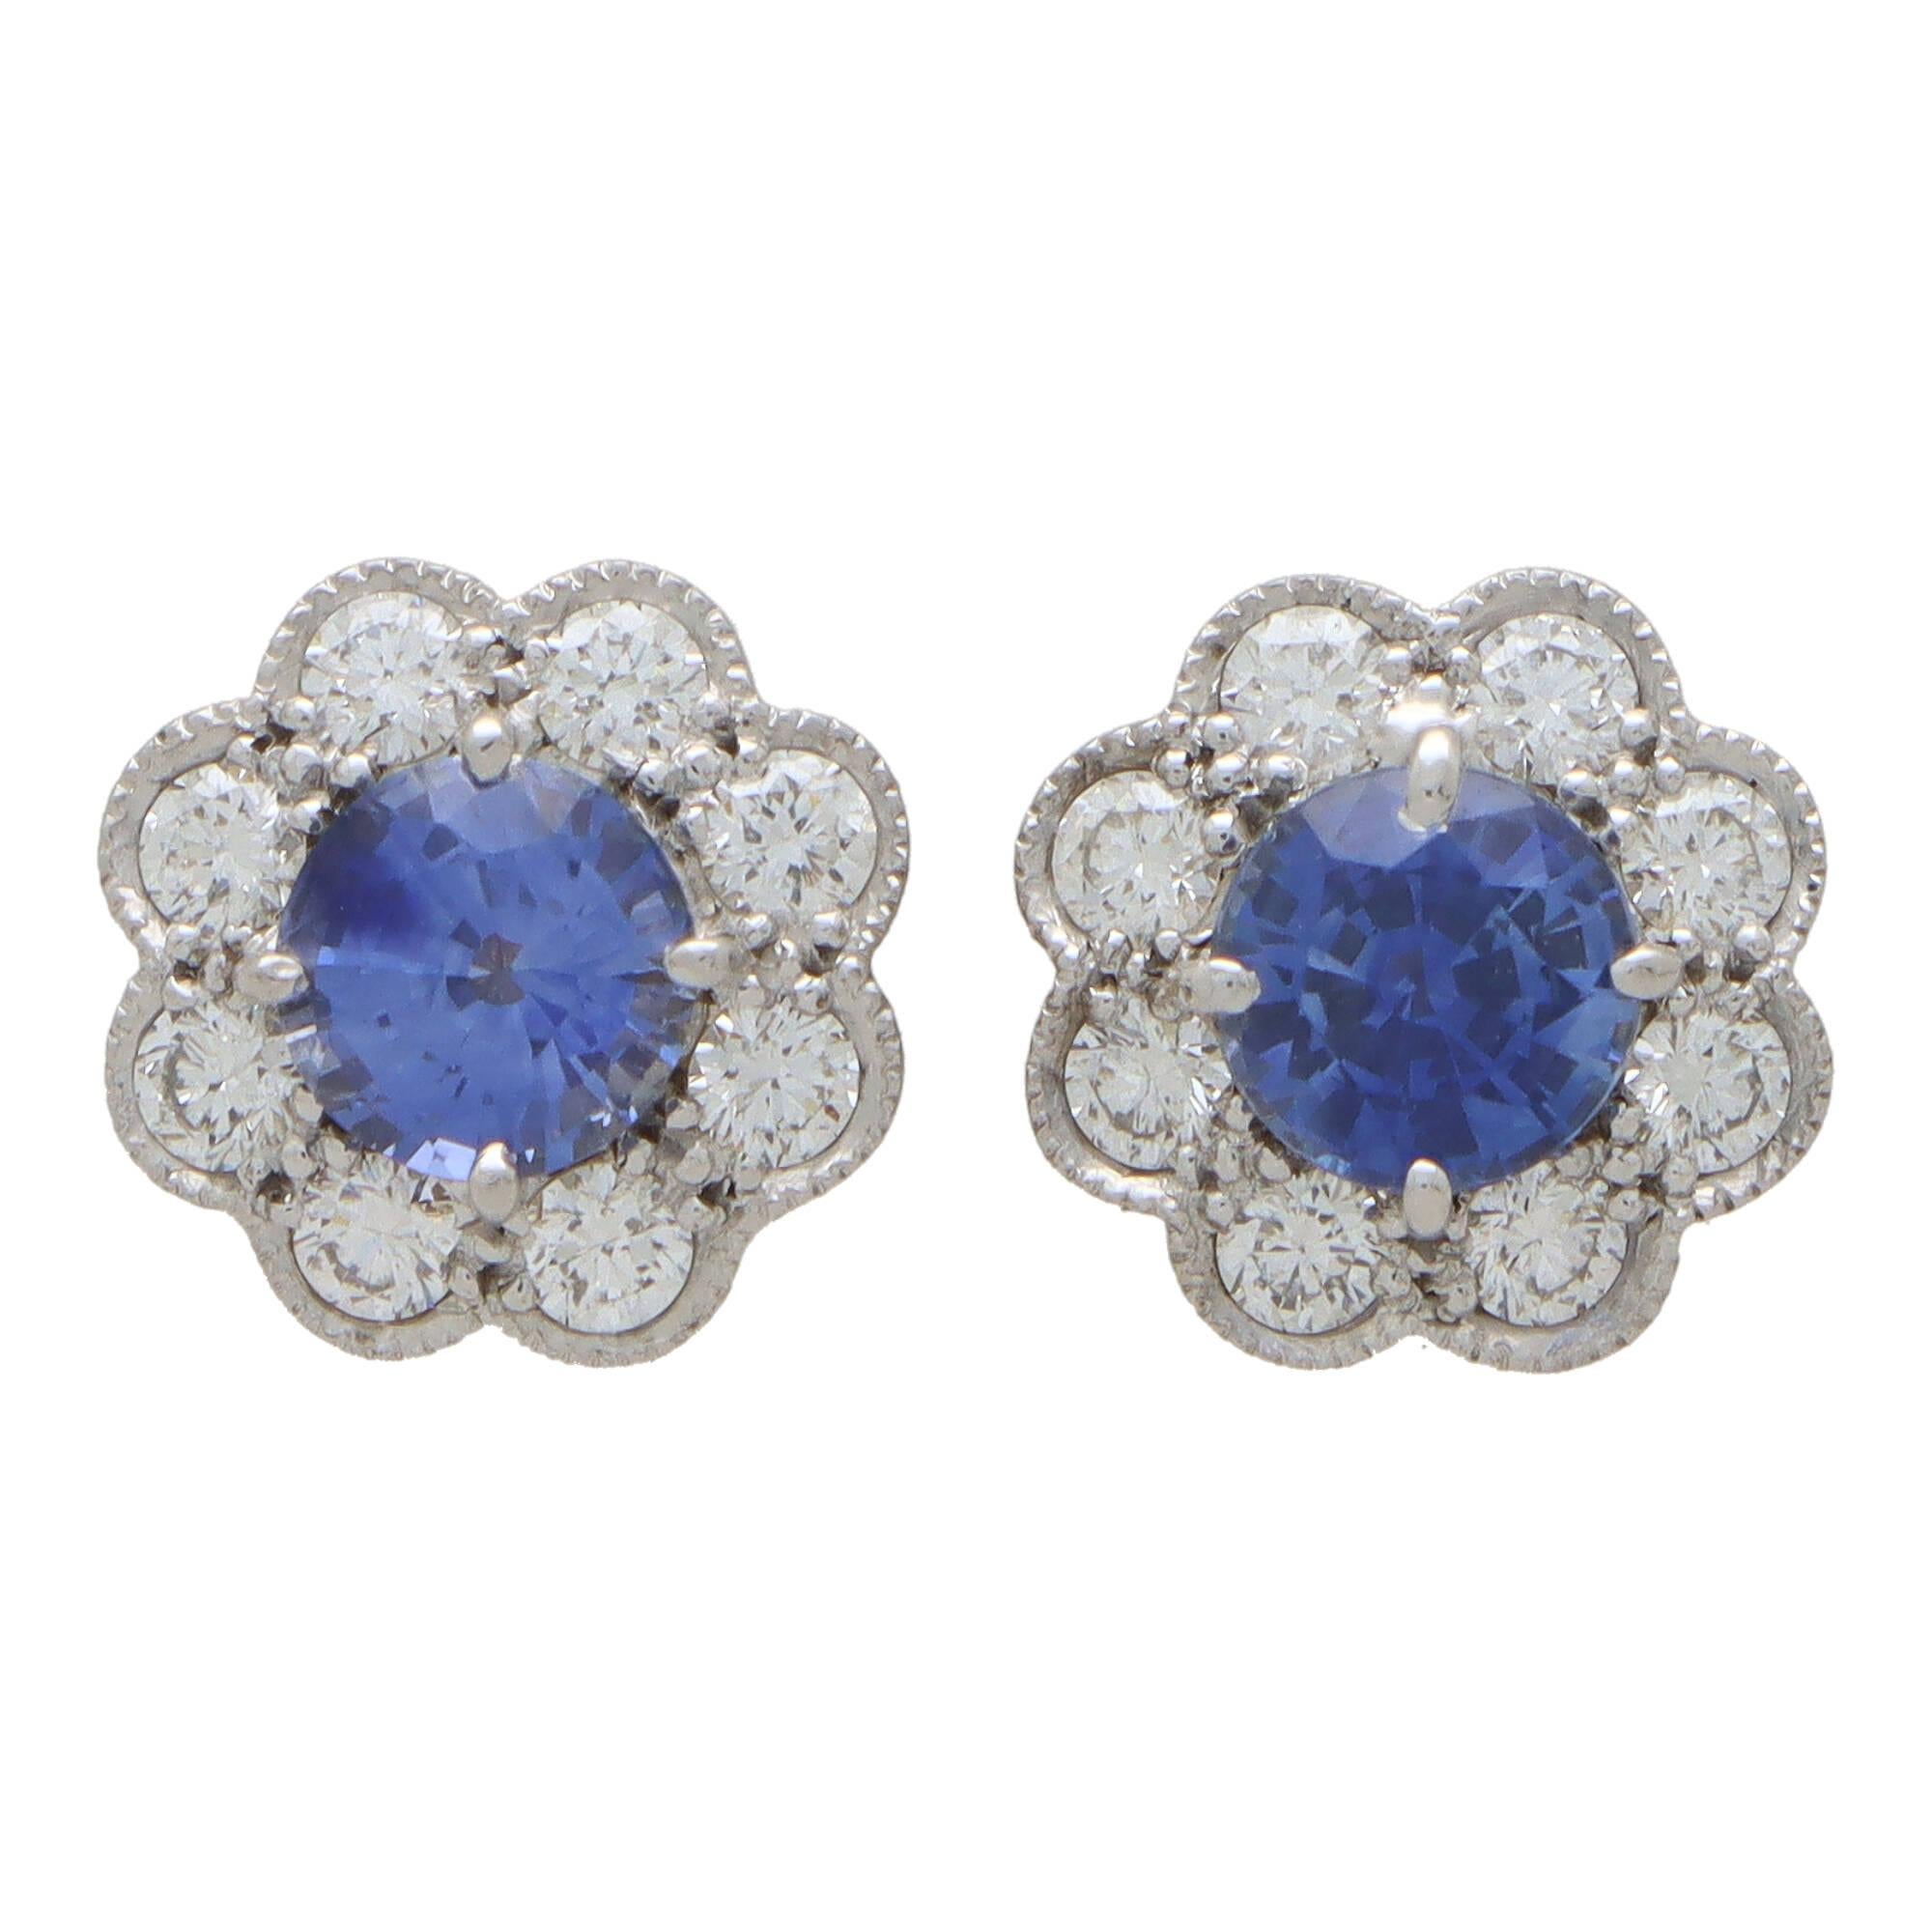 Contemporary Sapphire and Diamond Floral Cluster Earrings in Gold